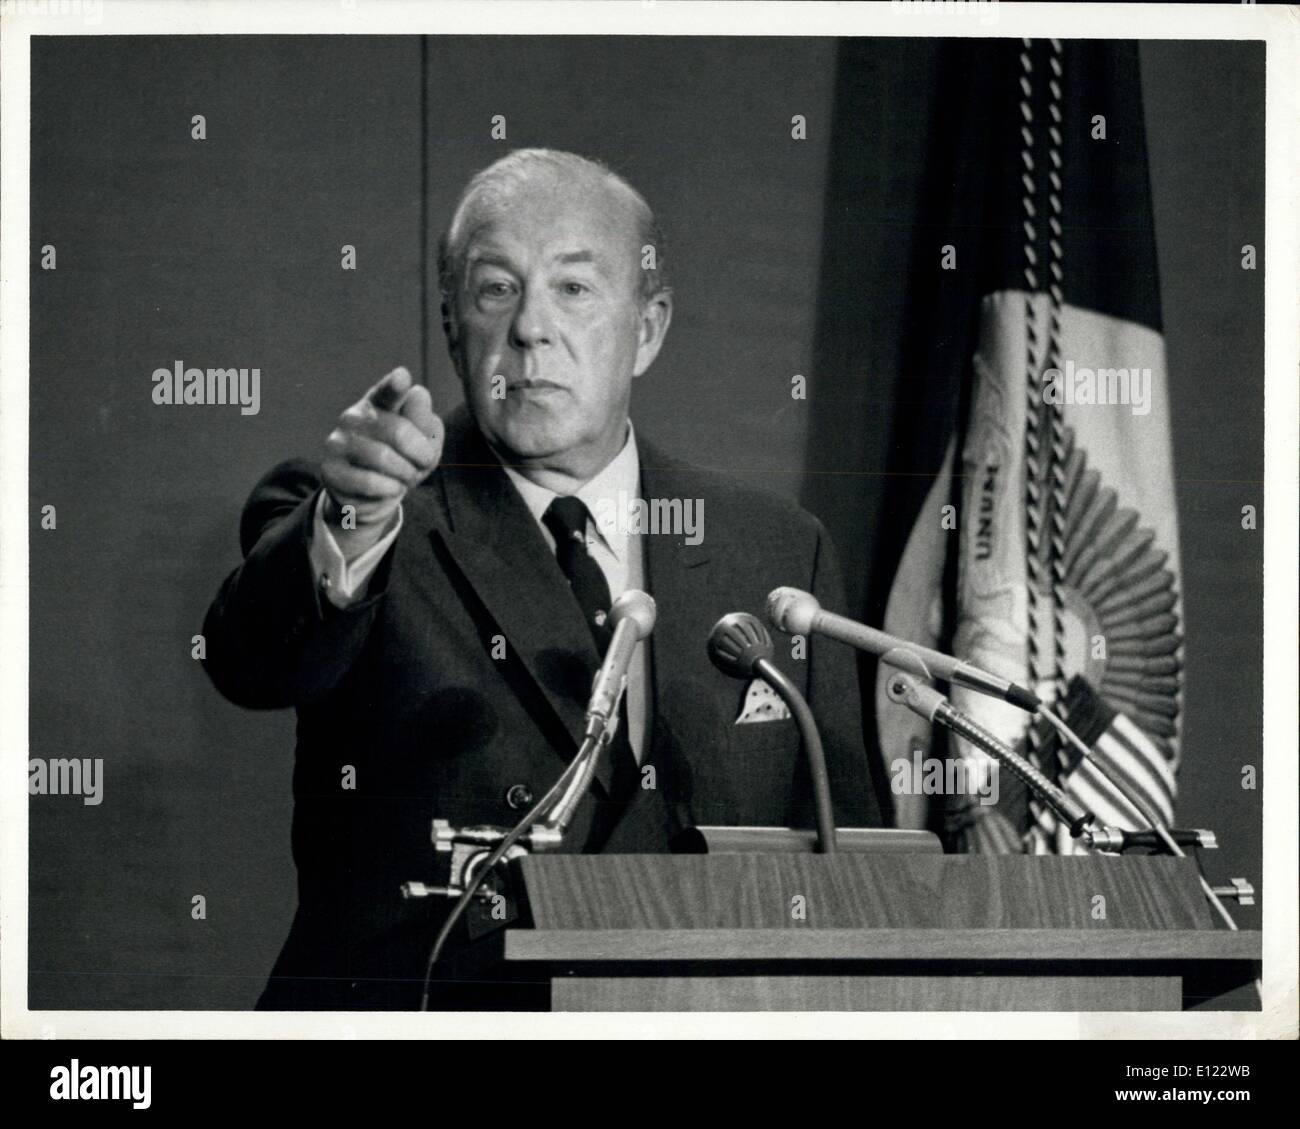 Oct. 25, 1983 - Washington, D.C.: Secretary of State George Shultz is shown during a State Department Press Conference today as Stock Photo